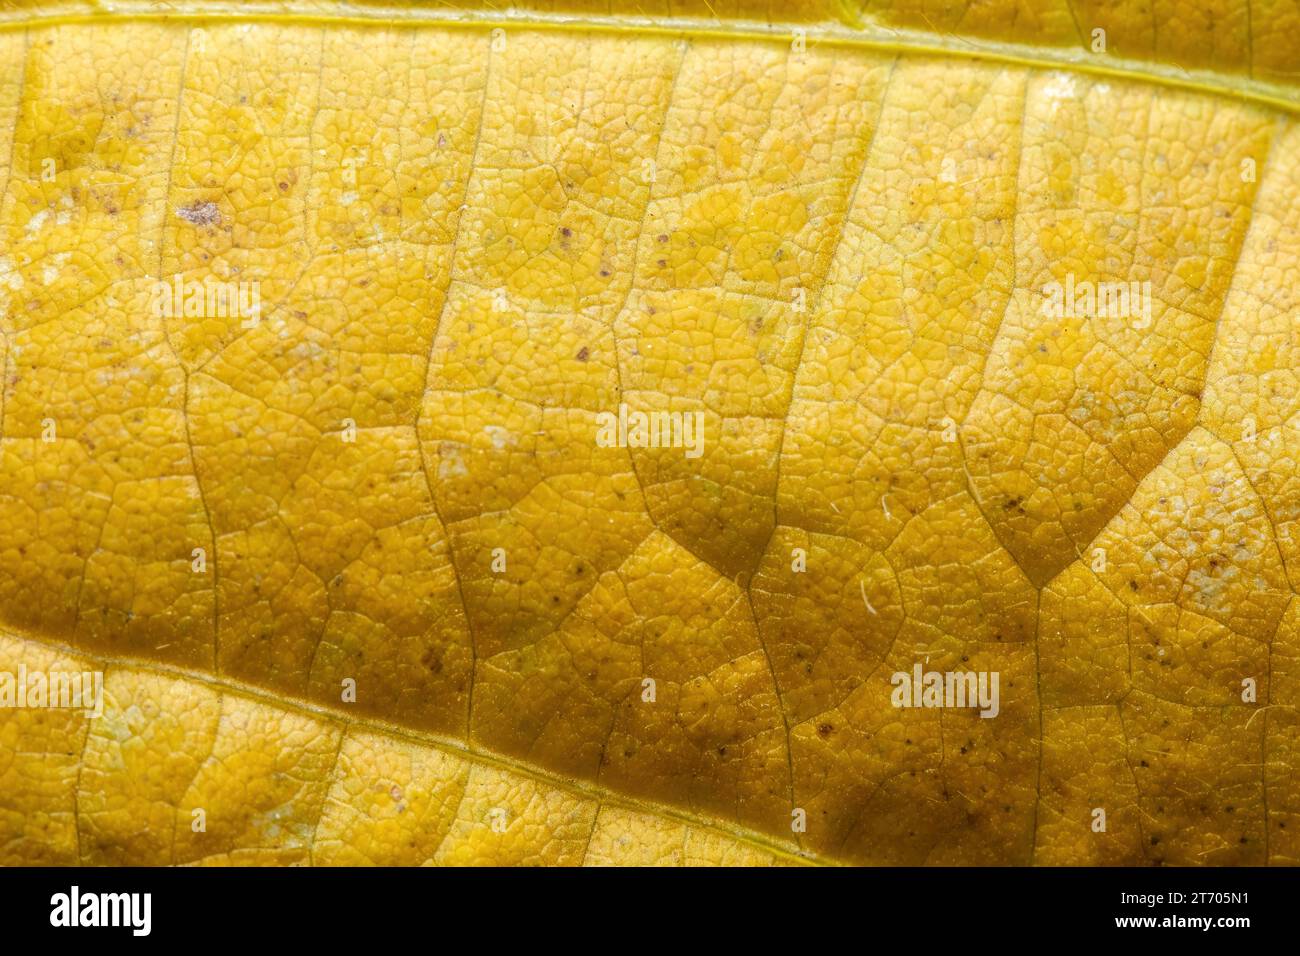 All yellow organic background from a senescing soybean leaf, inidicating autumn has arrived. Stock Photo